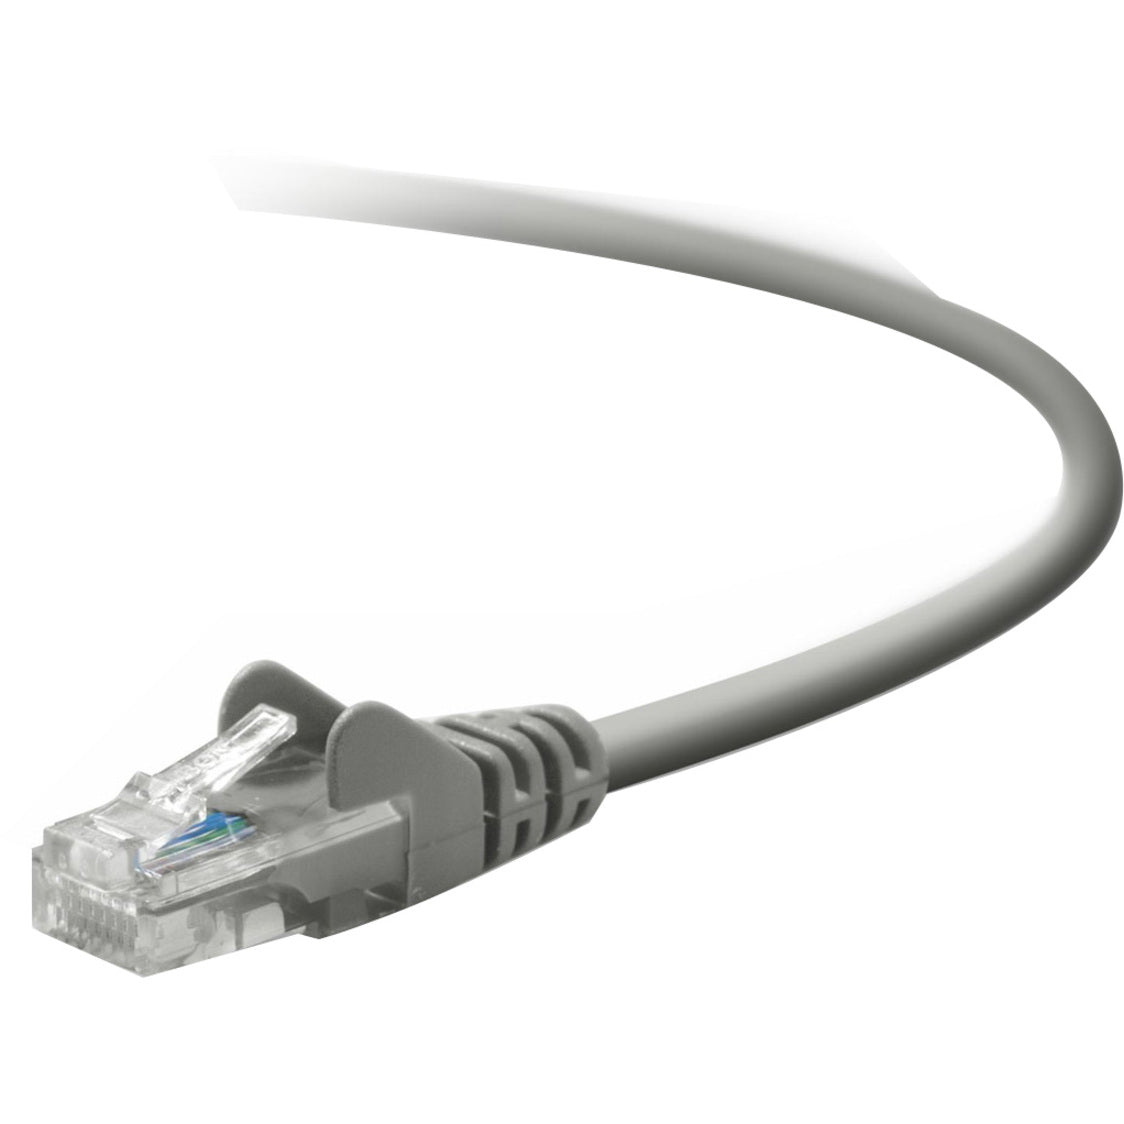 Belkin A3L791-01-S RJ45 Category 5e Snagless Patch Cable, 1 ft, Copper Conductor, Gray